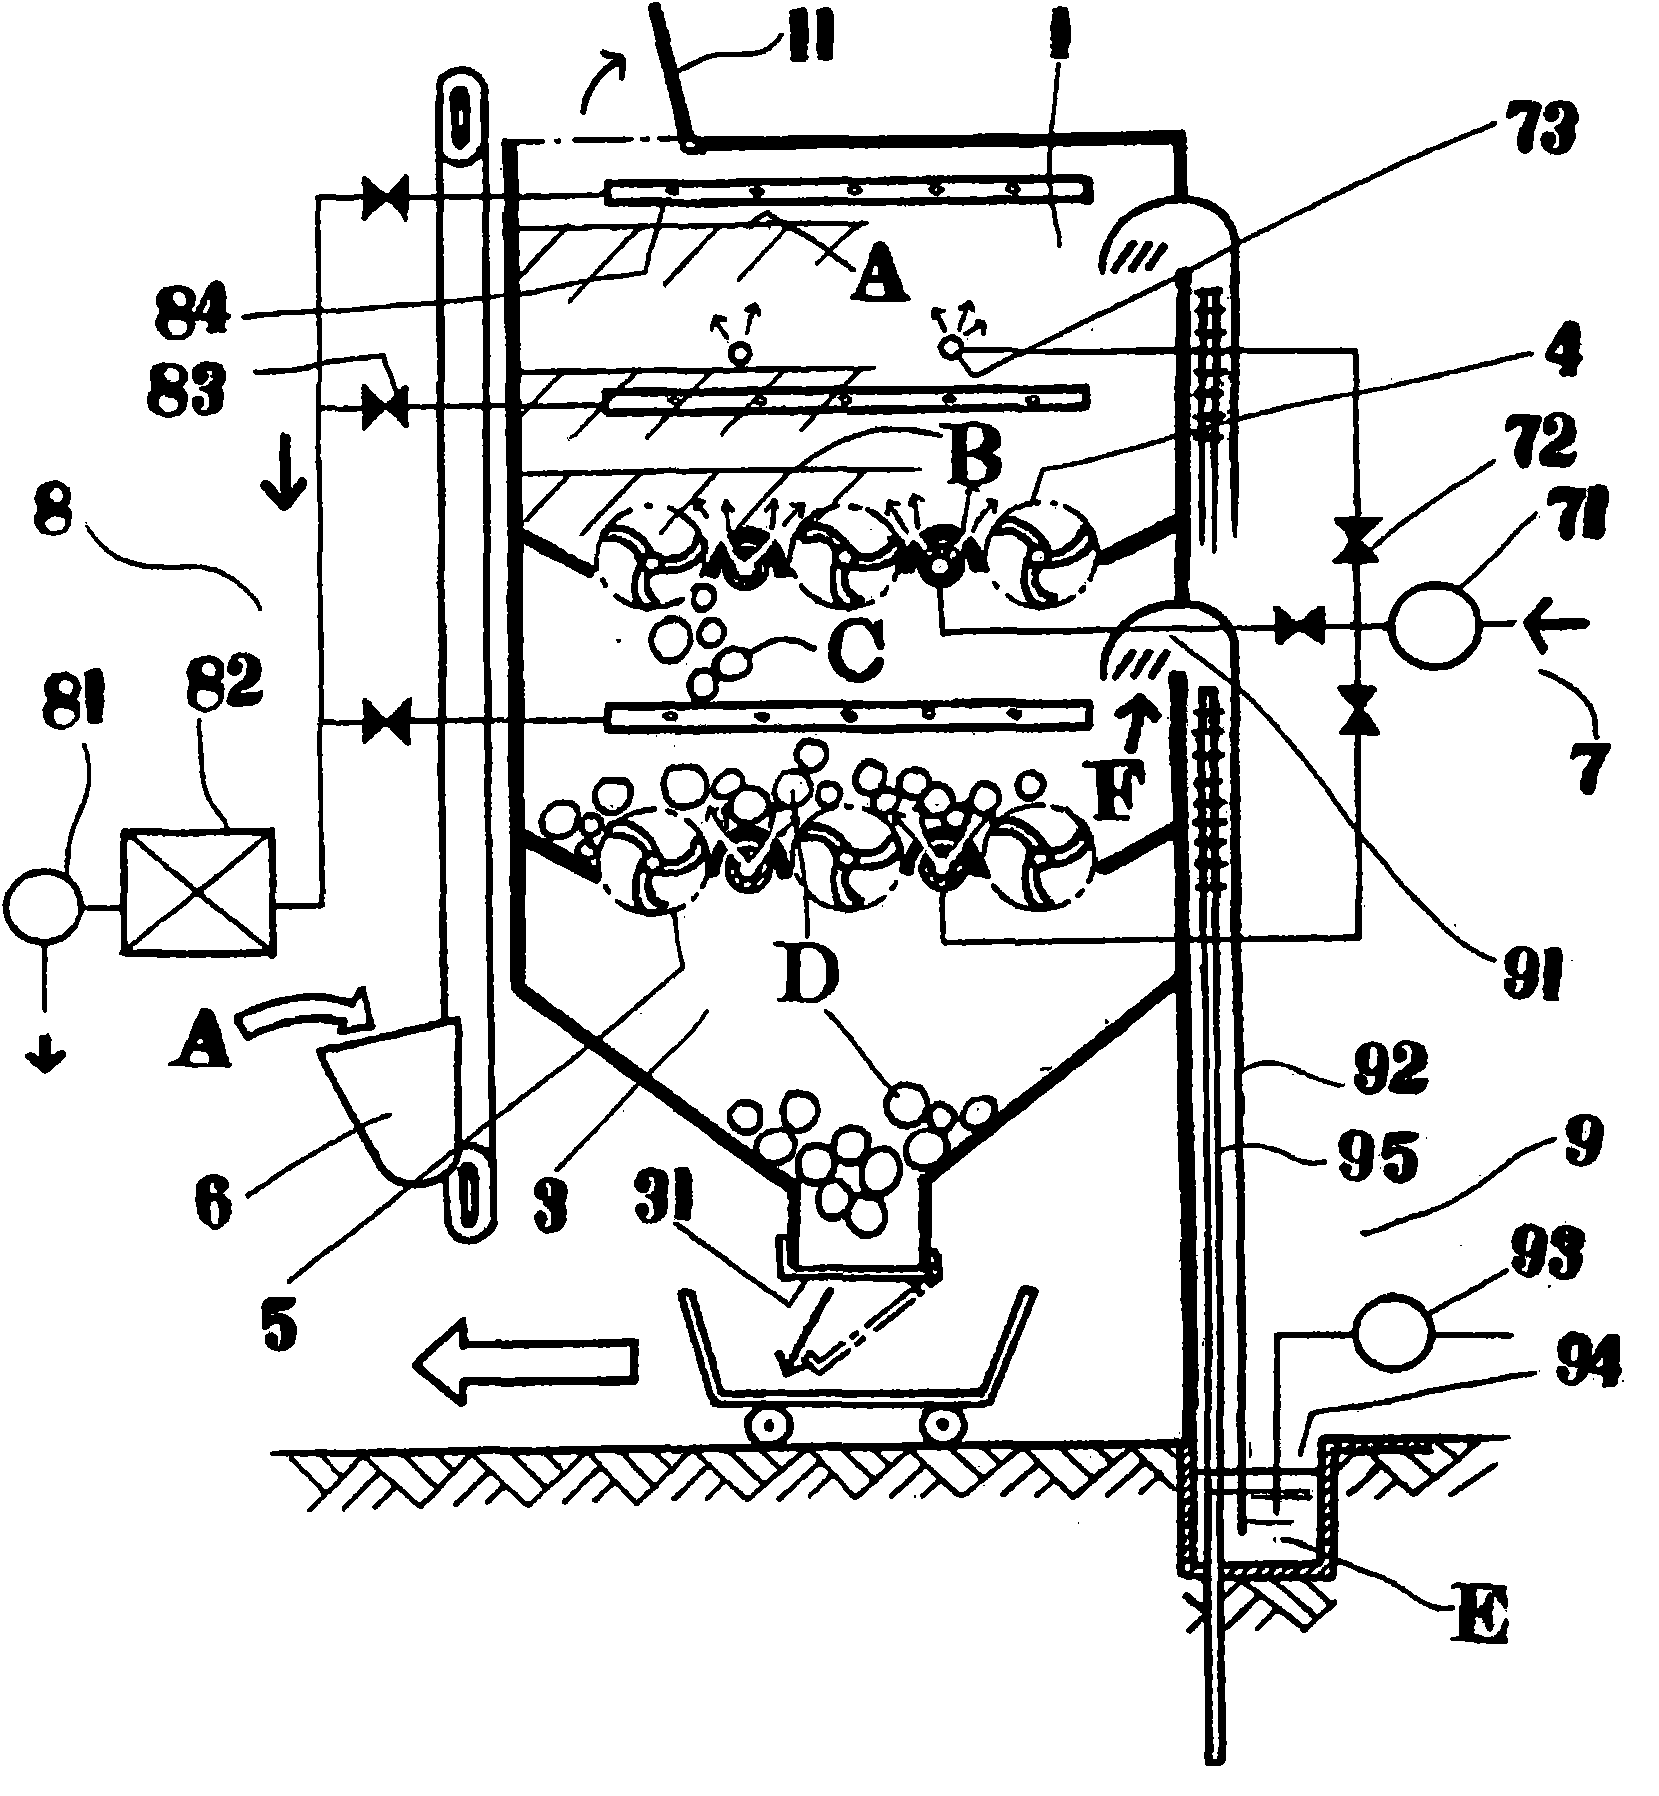 Fermentation treatment method and device of an organic waste